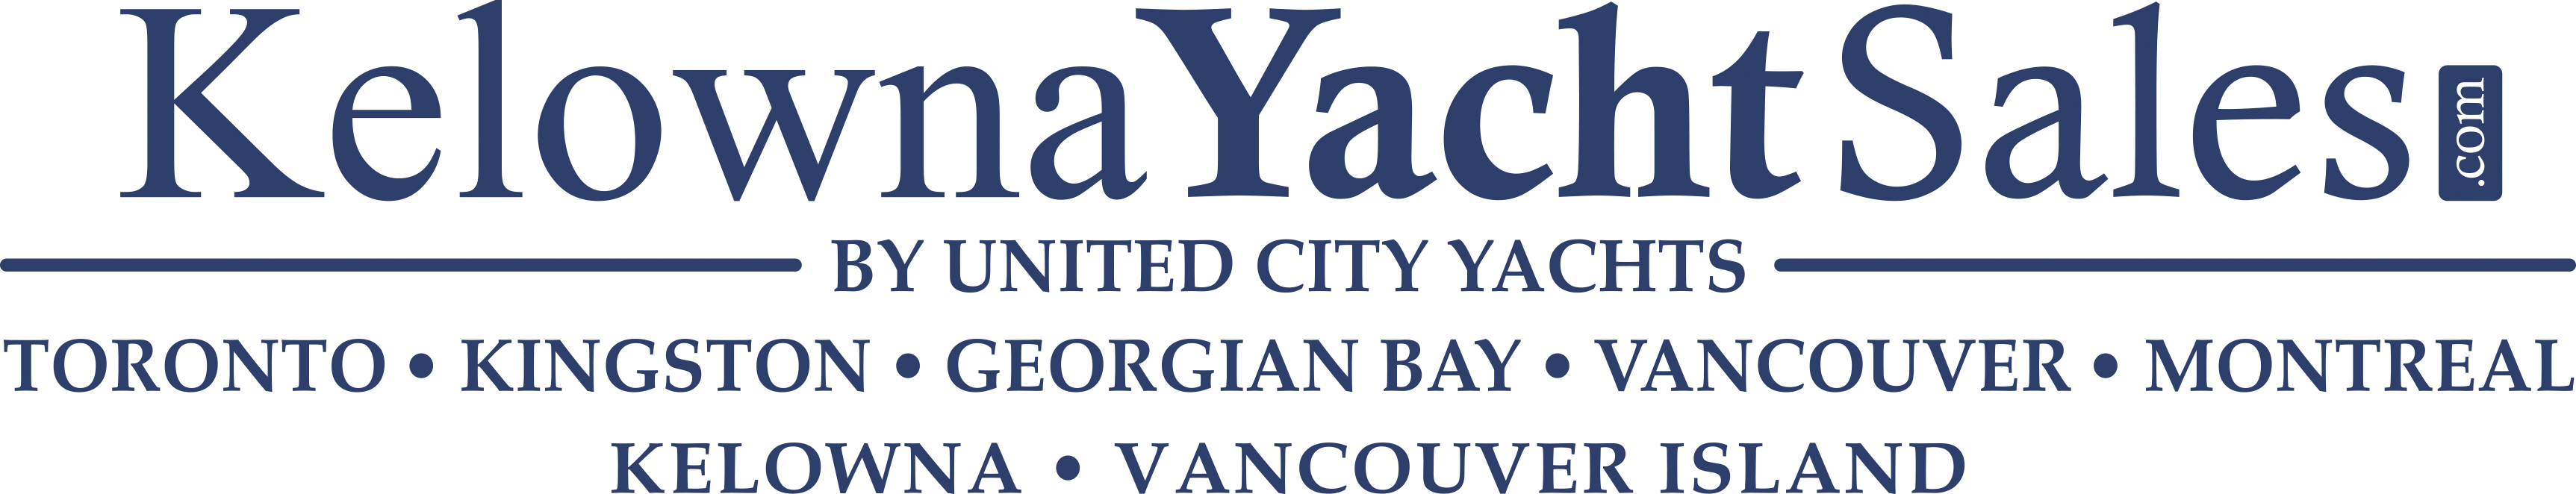 toronto yacht sales by united city yachts